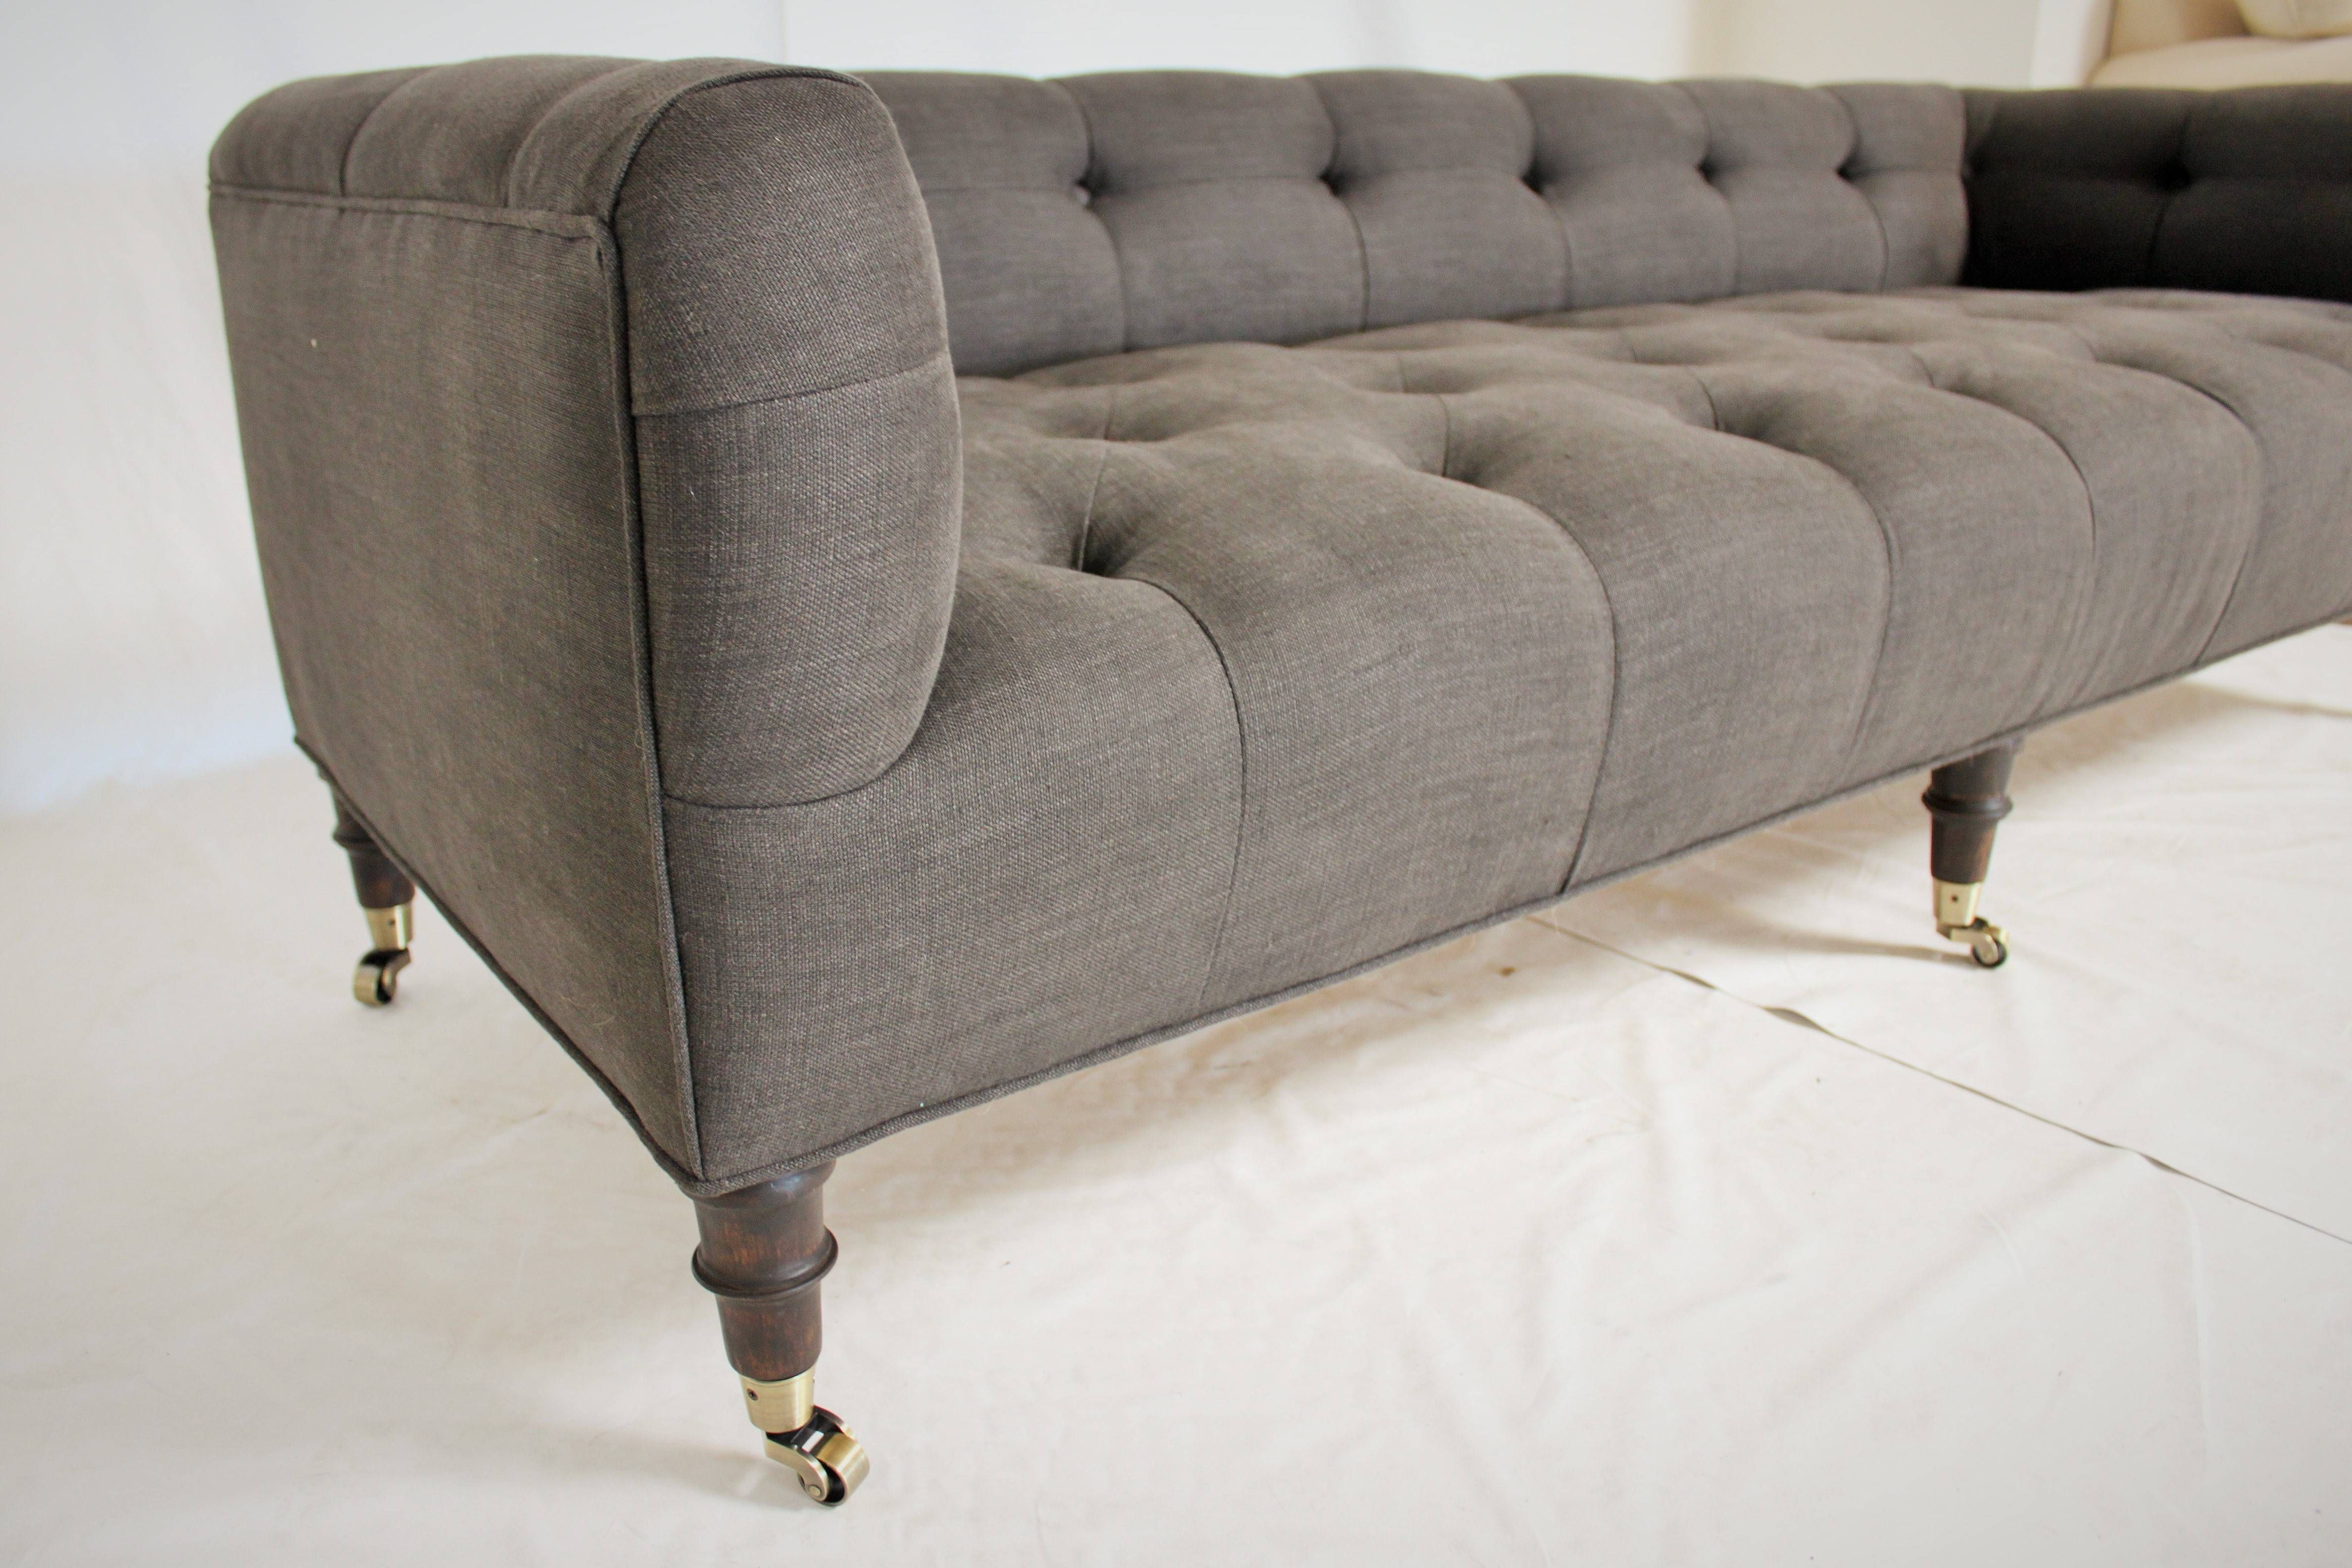 Sofa Bench With Decorative Casters – Mrb Custom Sofas Throughout Casters Sofas (View 1 of 15)